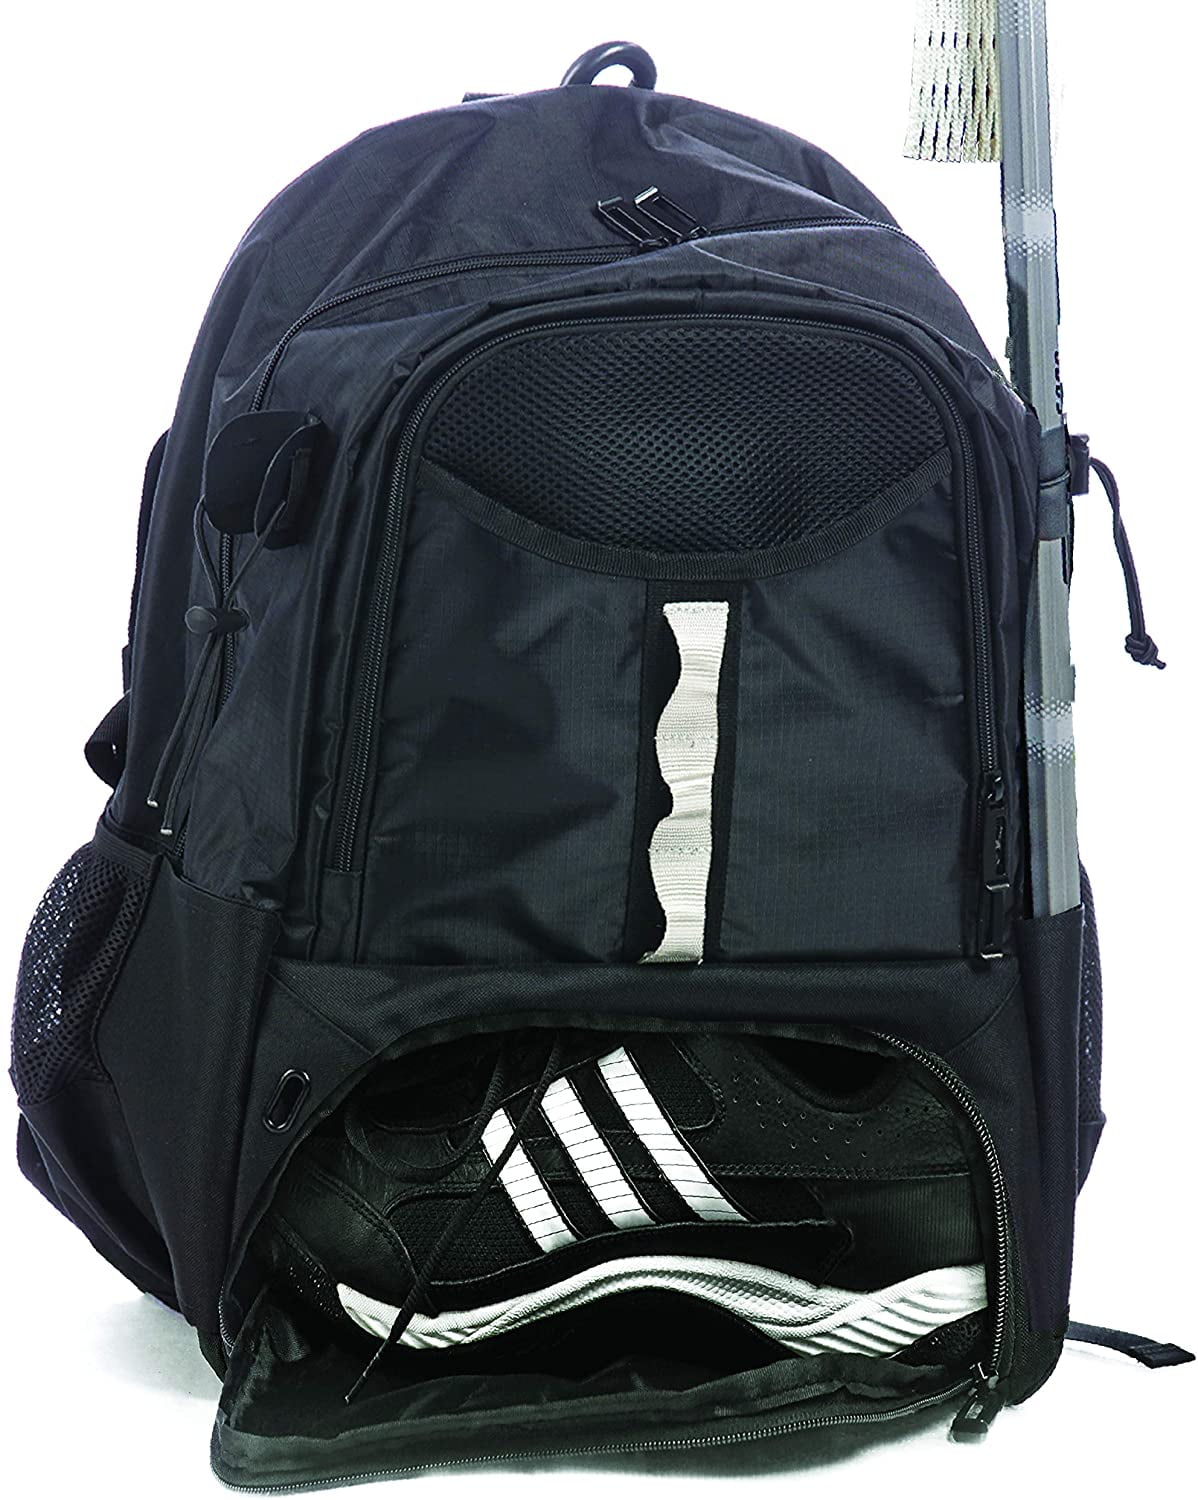 Extra Large Lacrosse Backpack Holds All Lacrosse or Field Hockey Equipment Two Stick Holders and Separate Cleats Compartment Athletico Youth Lacrosse Bag 